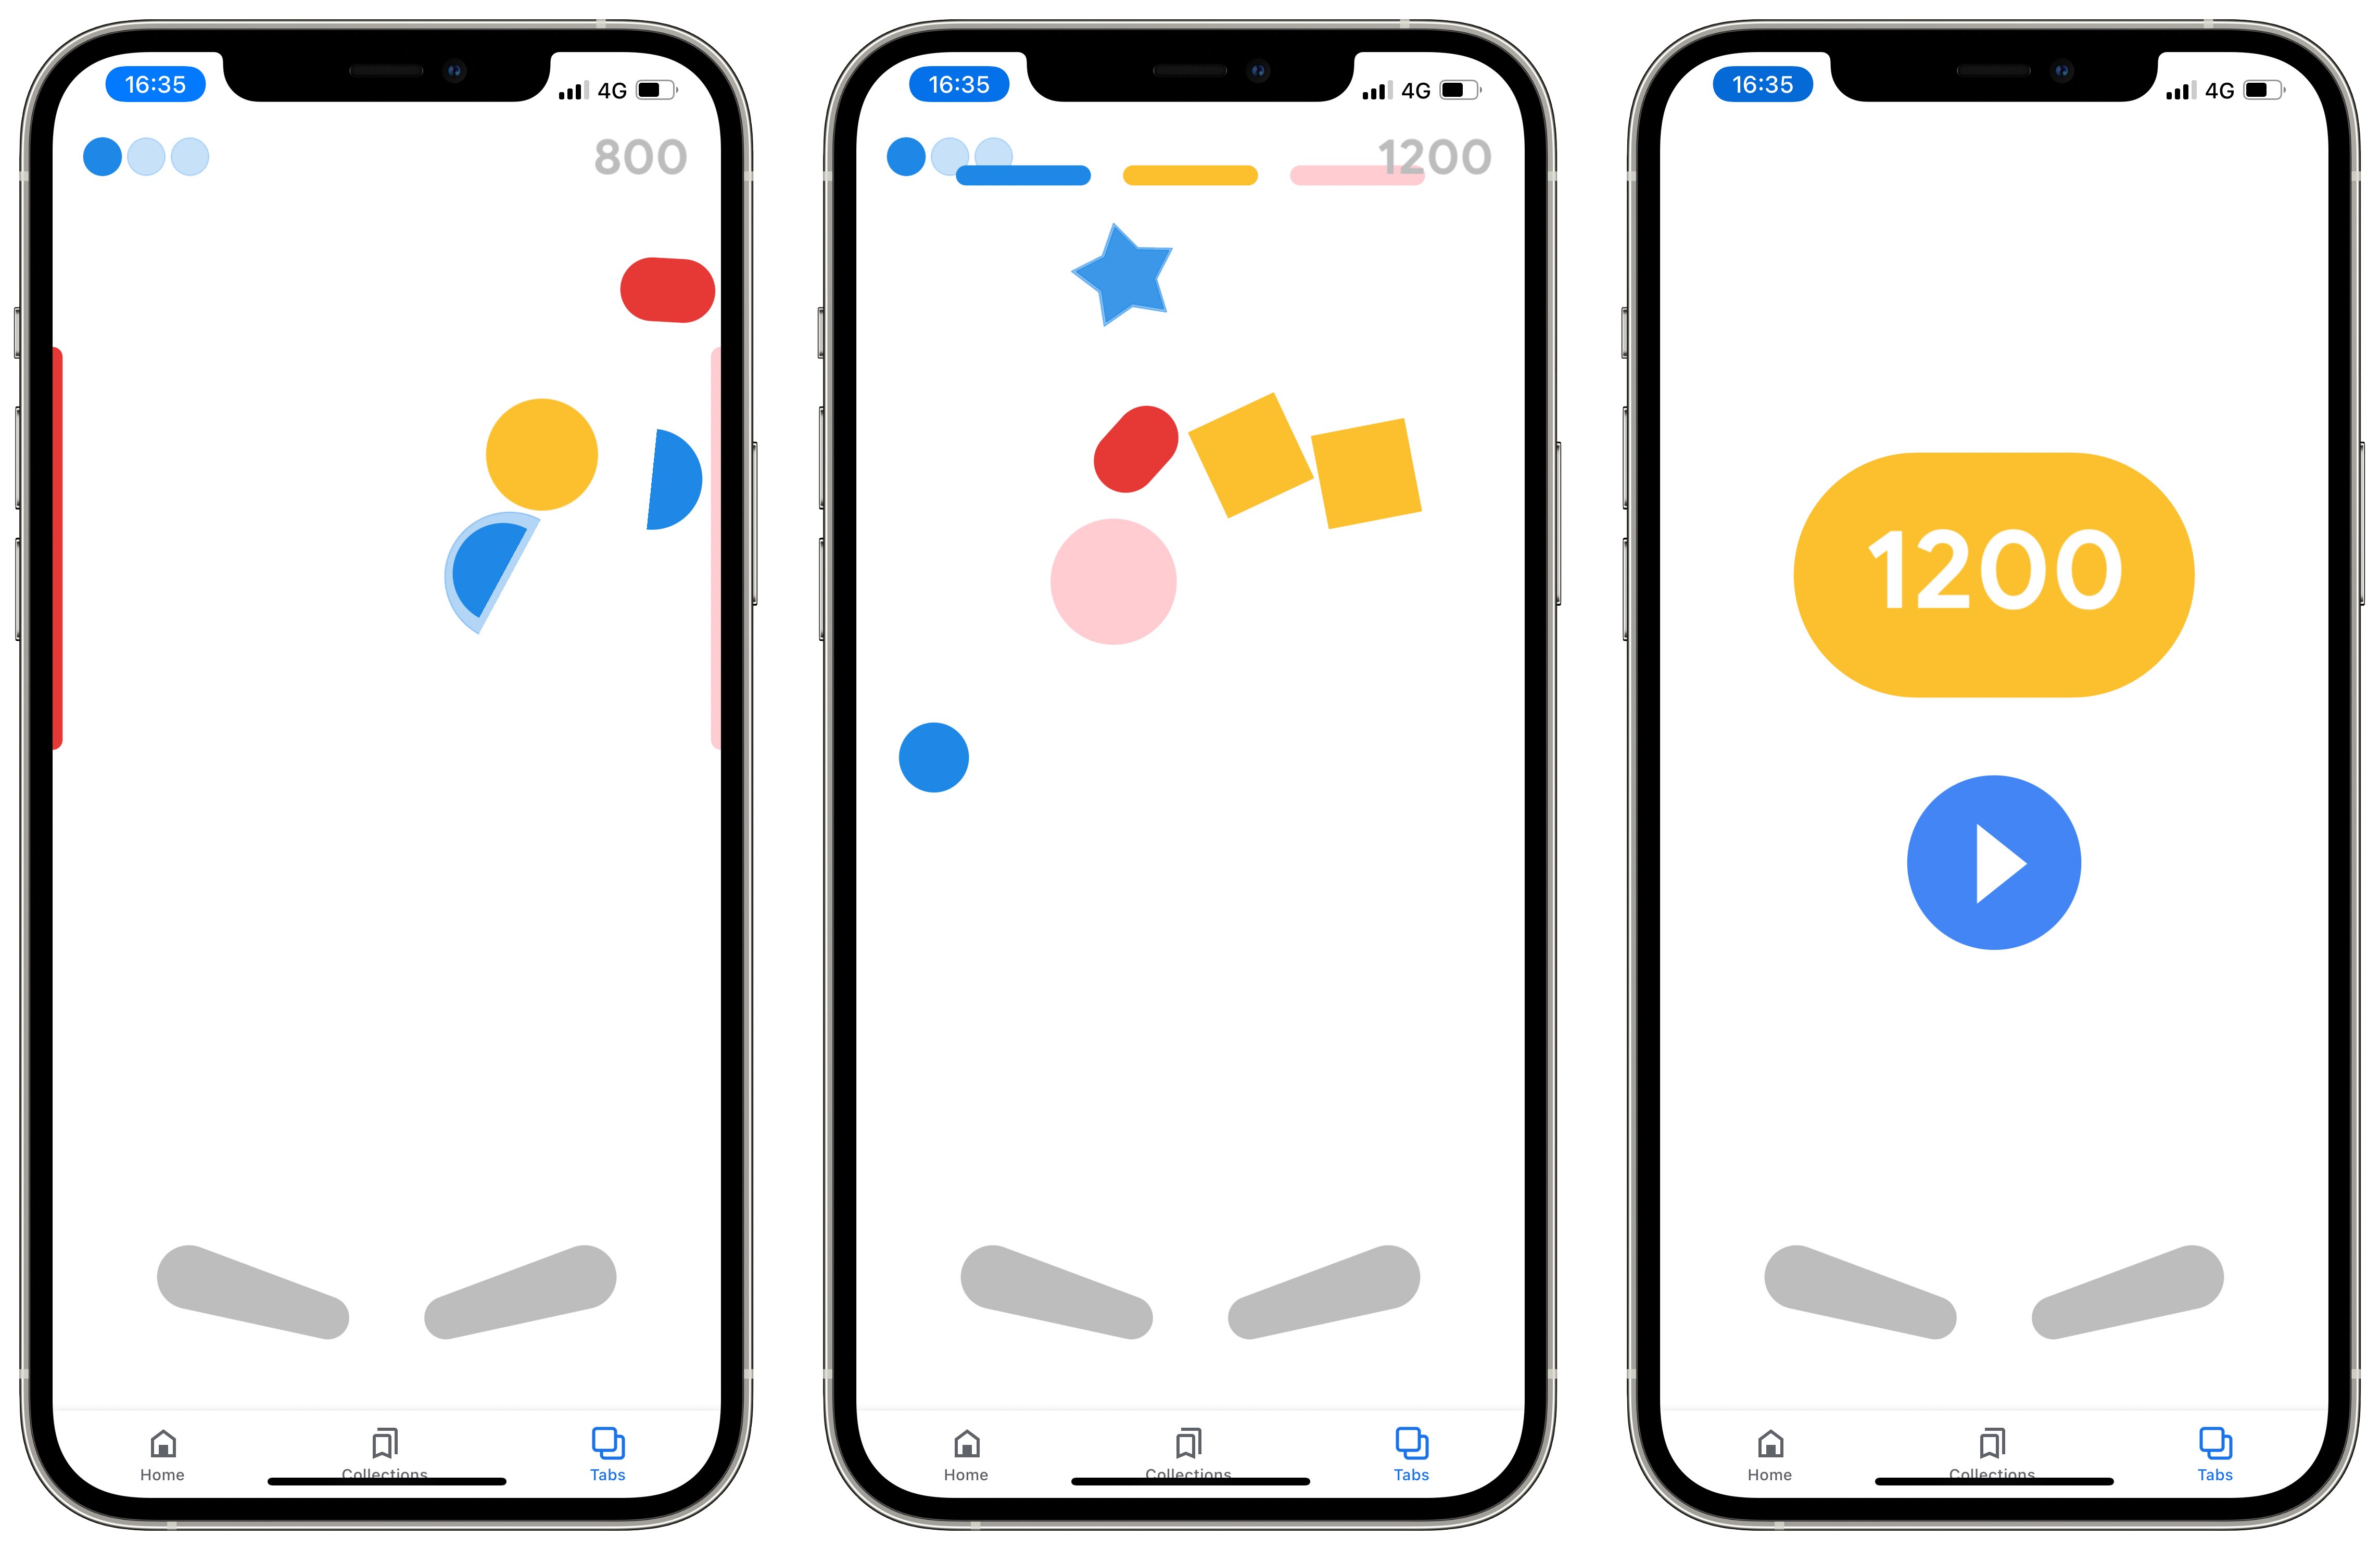 Screenshots showing Google's Easter egg pinball game in its iOS app on iPhone